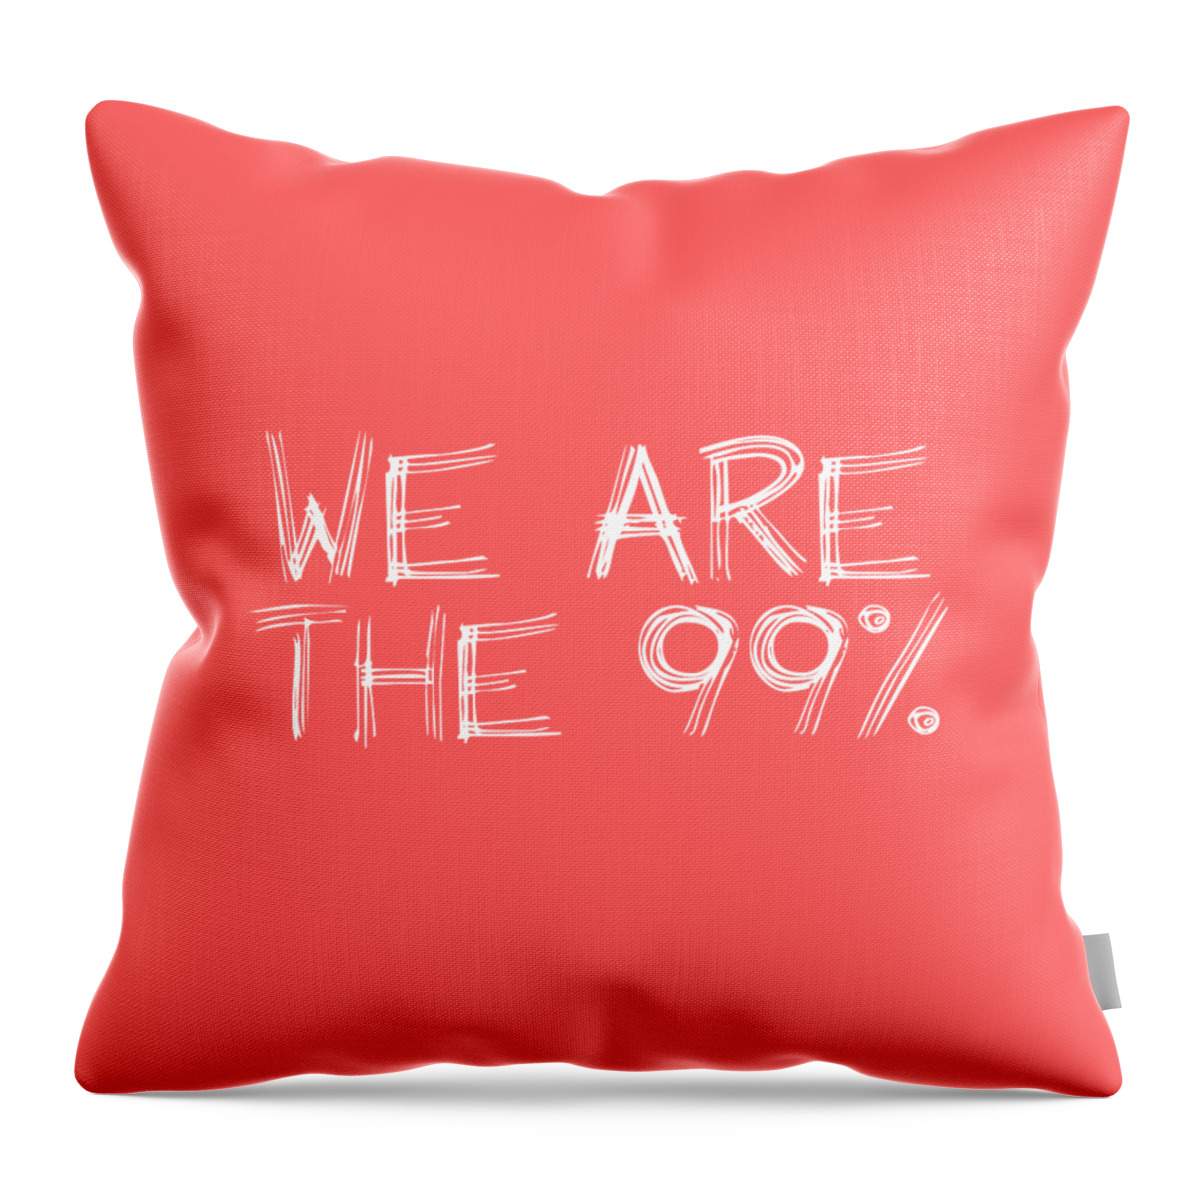 We Are The 99 Throw Pillow featuring the digital art We Are The 99 Percent by Az Jackson